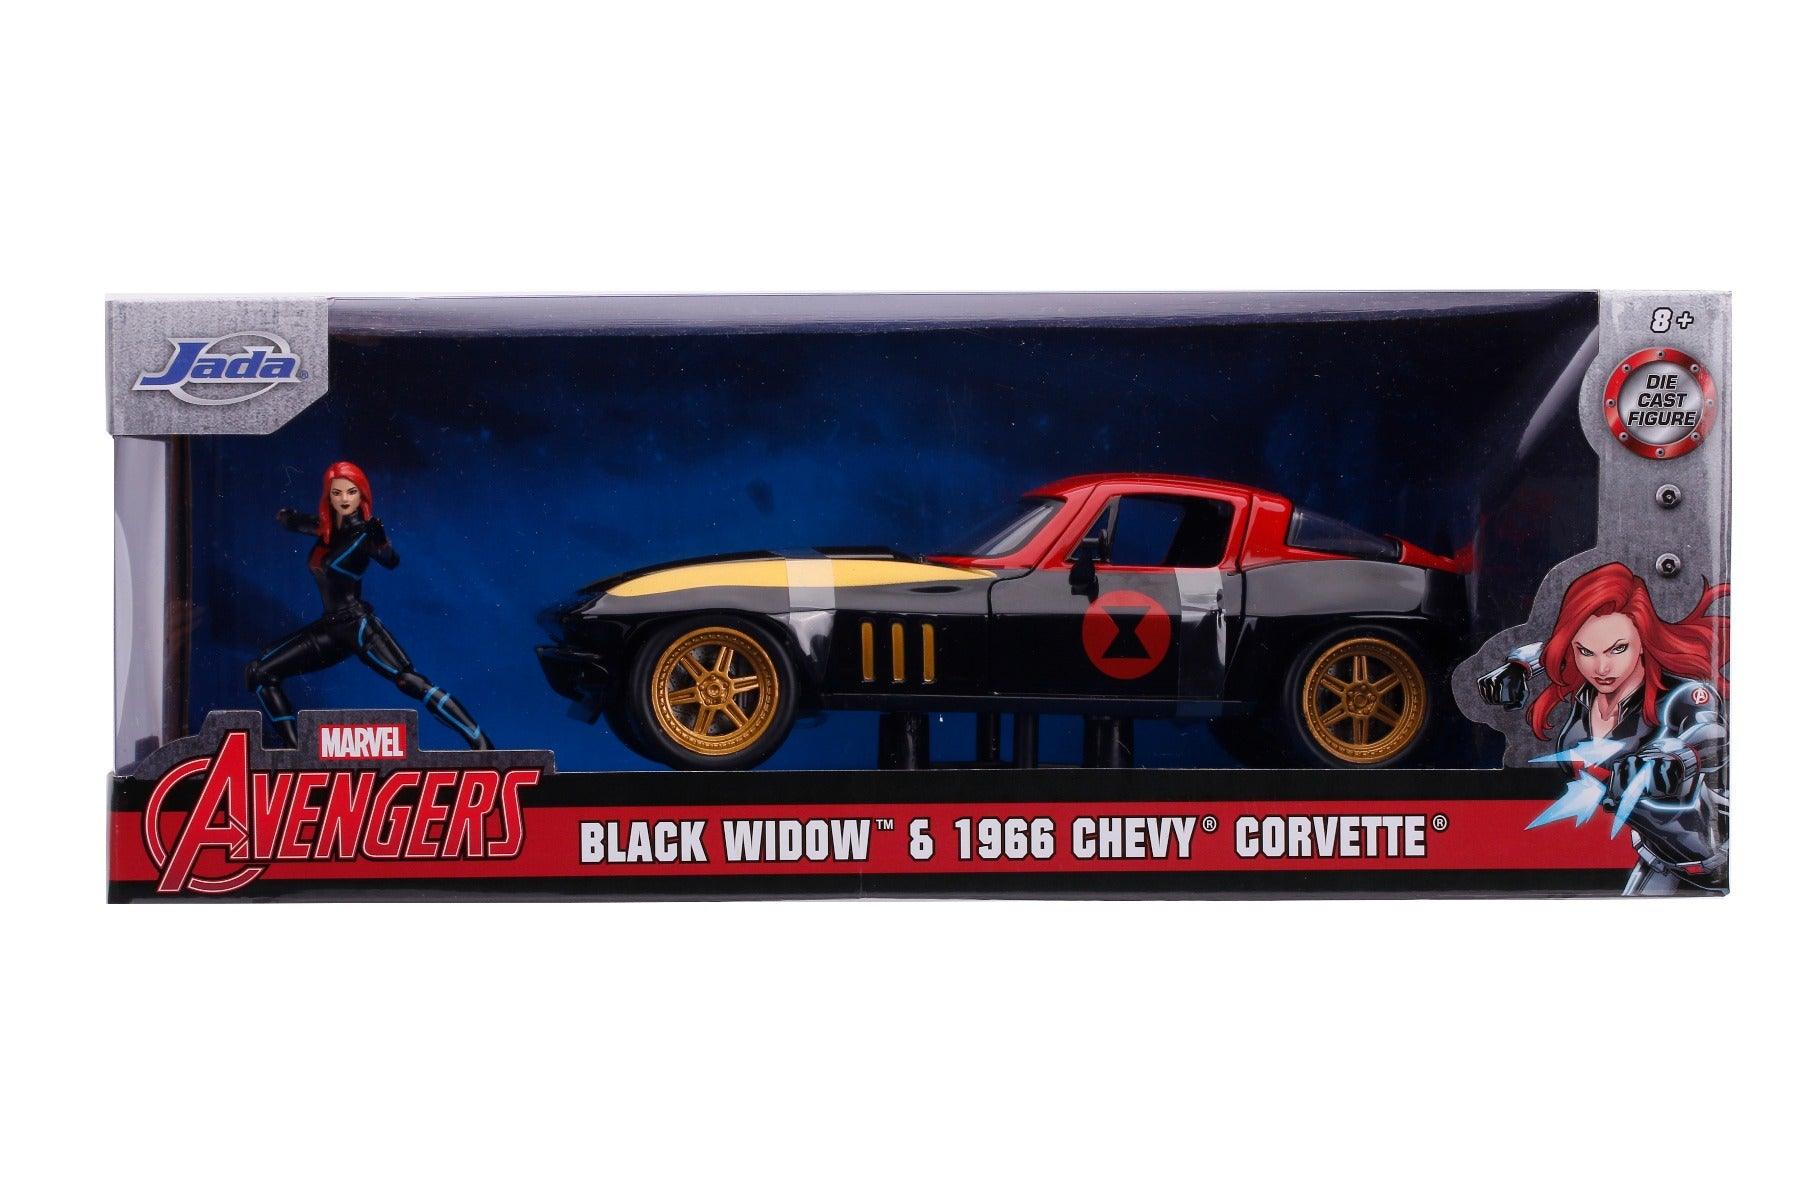 Jada Toys Diecast Hollywood Rides 1:24 1966 Chevy Corvette Car with Black Widow Action Figure